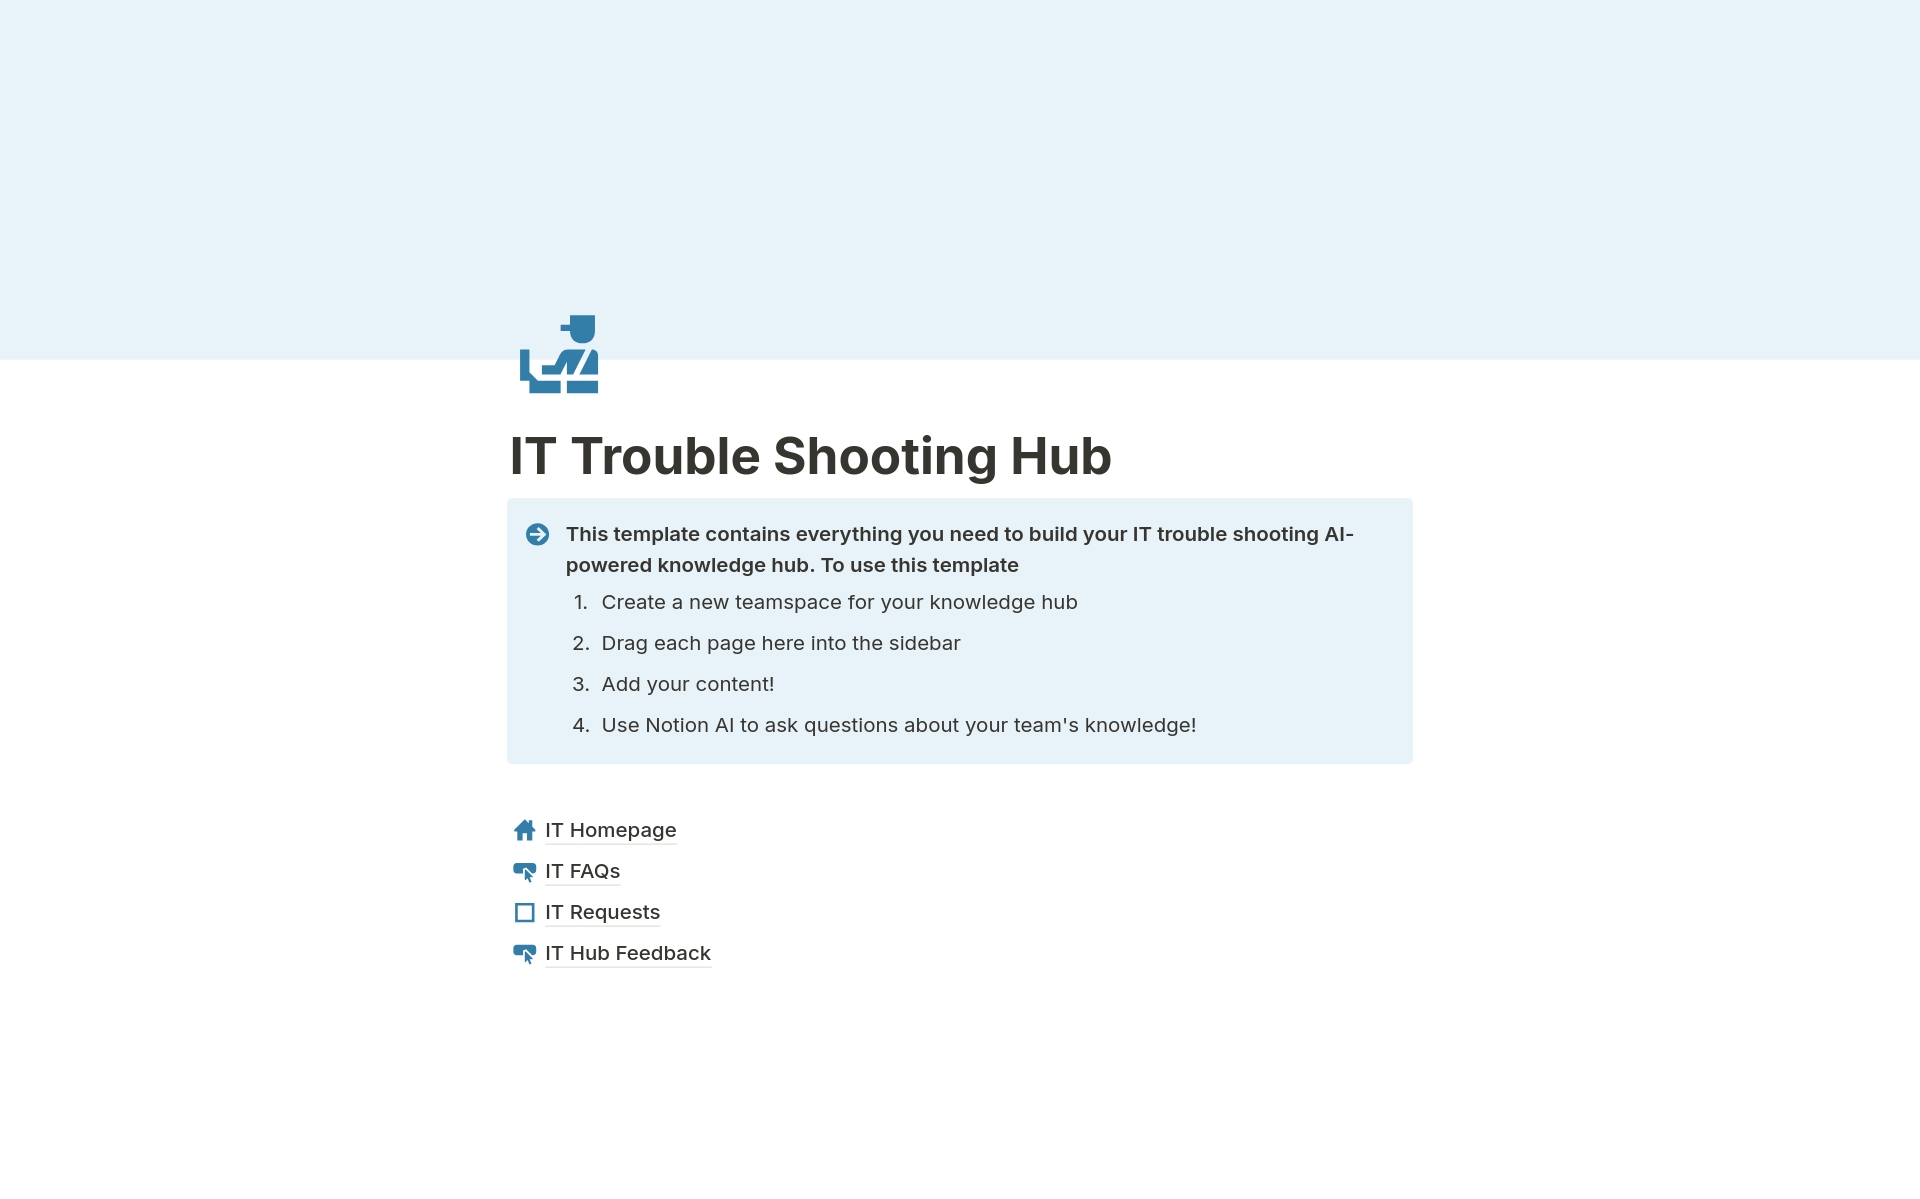 Enhance your IT team's efficiency with this AI-powered IT Troubleshooting Hub template, designed to streamline issue resolution and support.